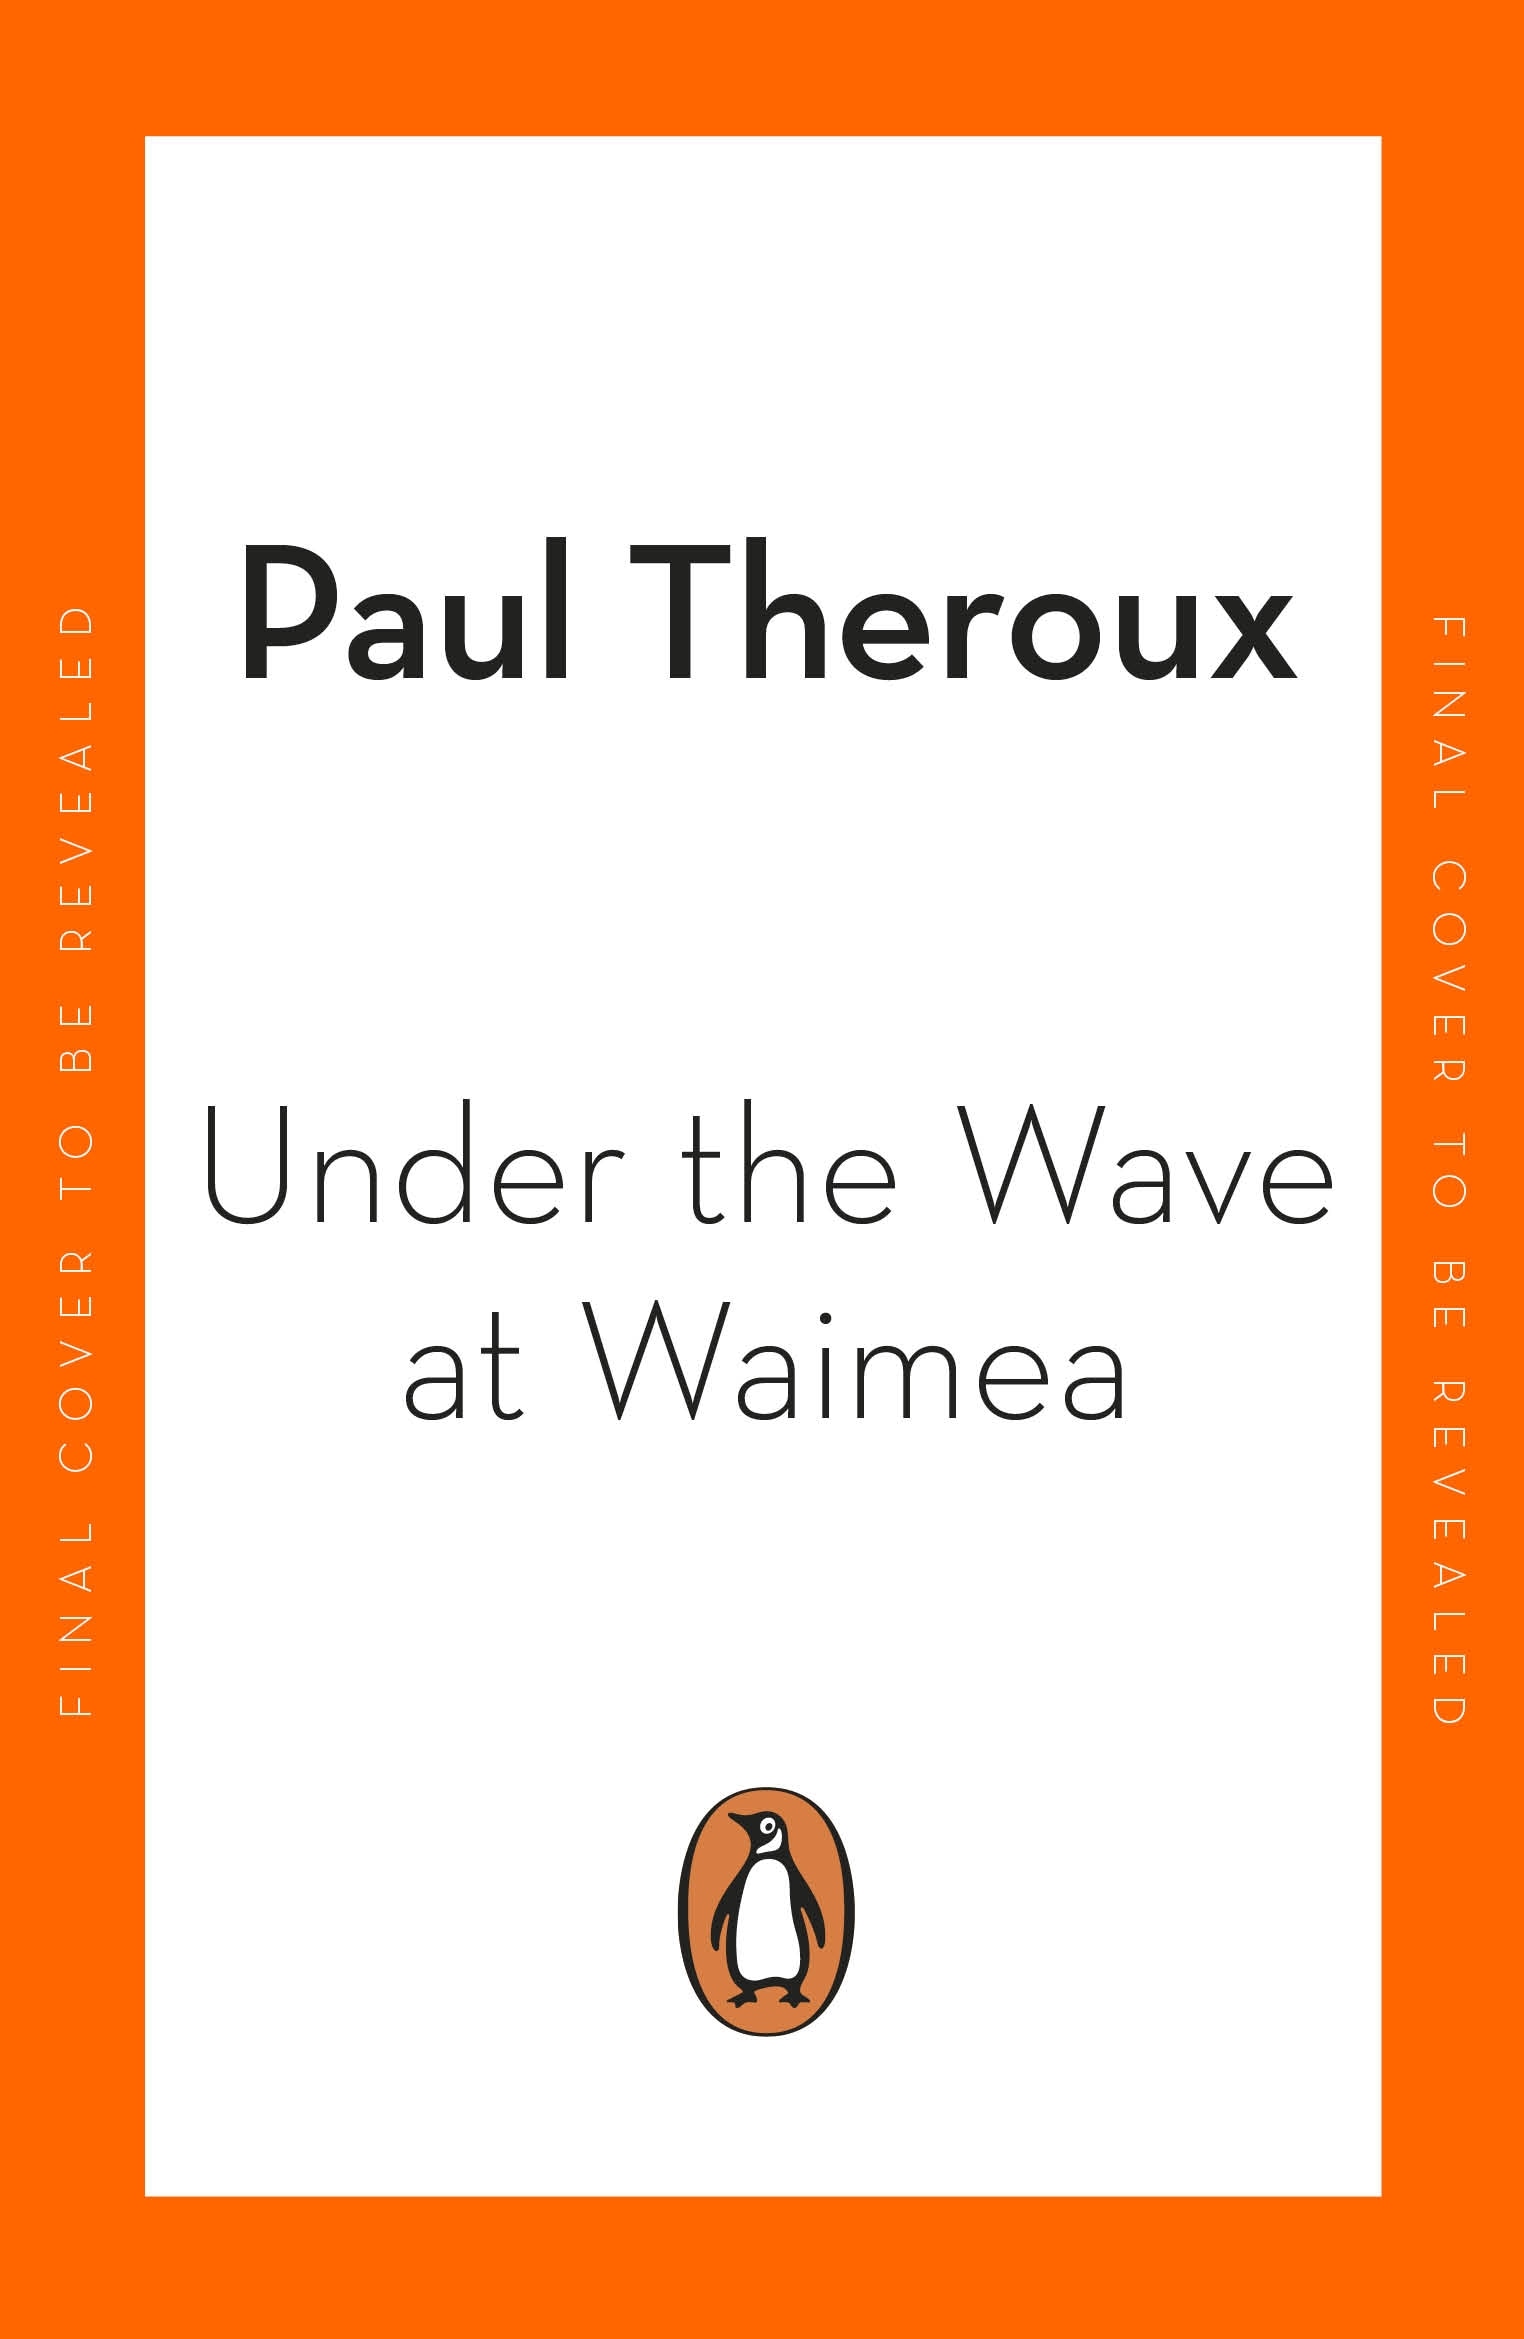 Book “Under the Wave at Waimea” by Paul Theroux — October 6, 2022